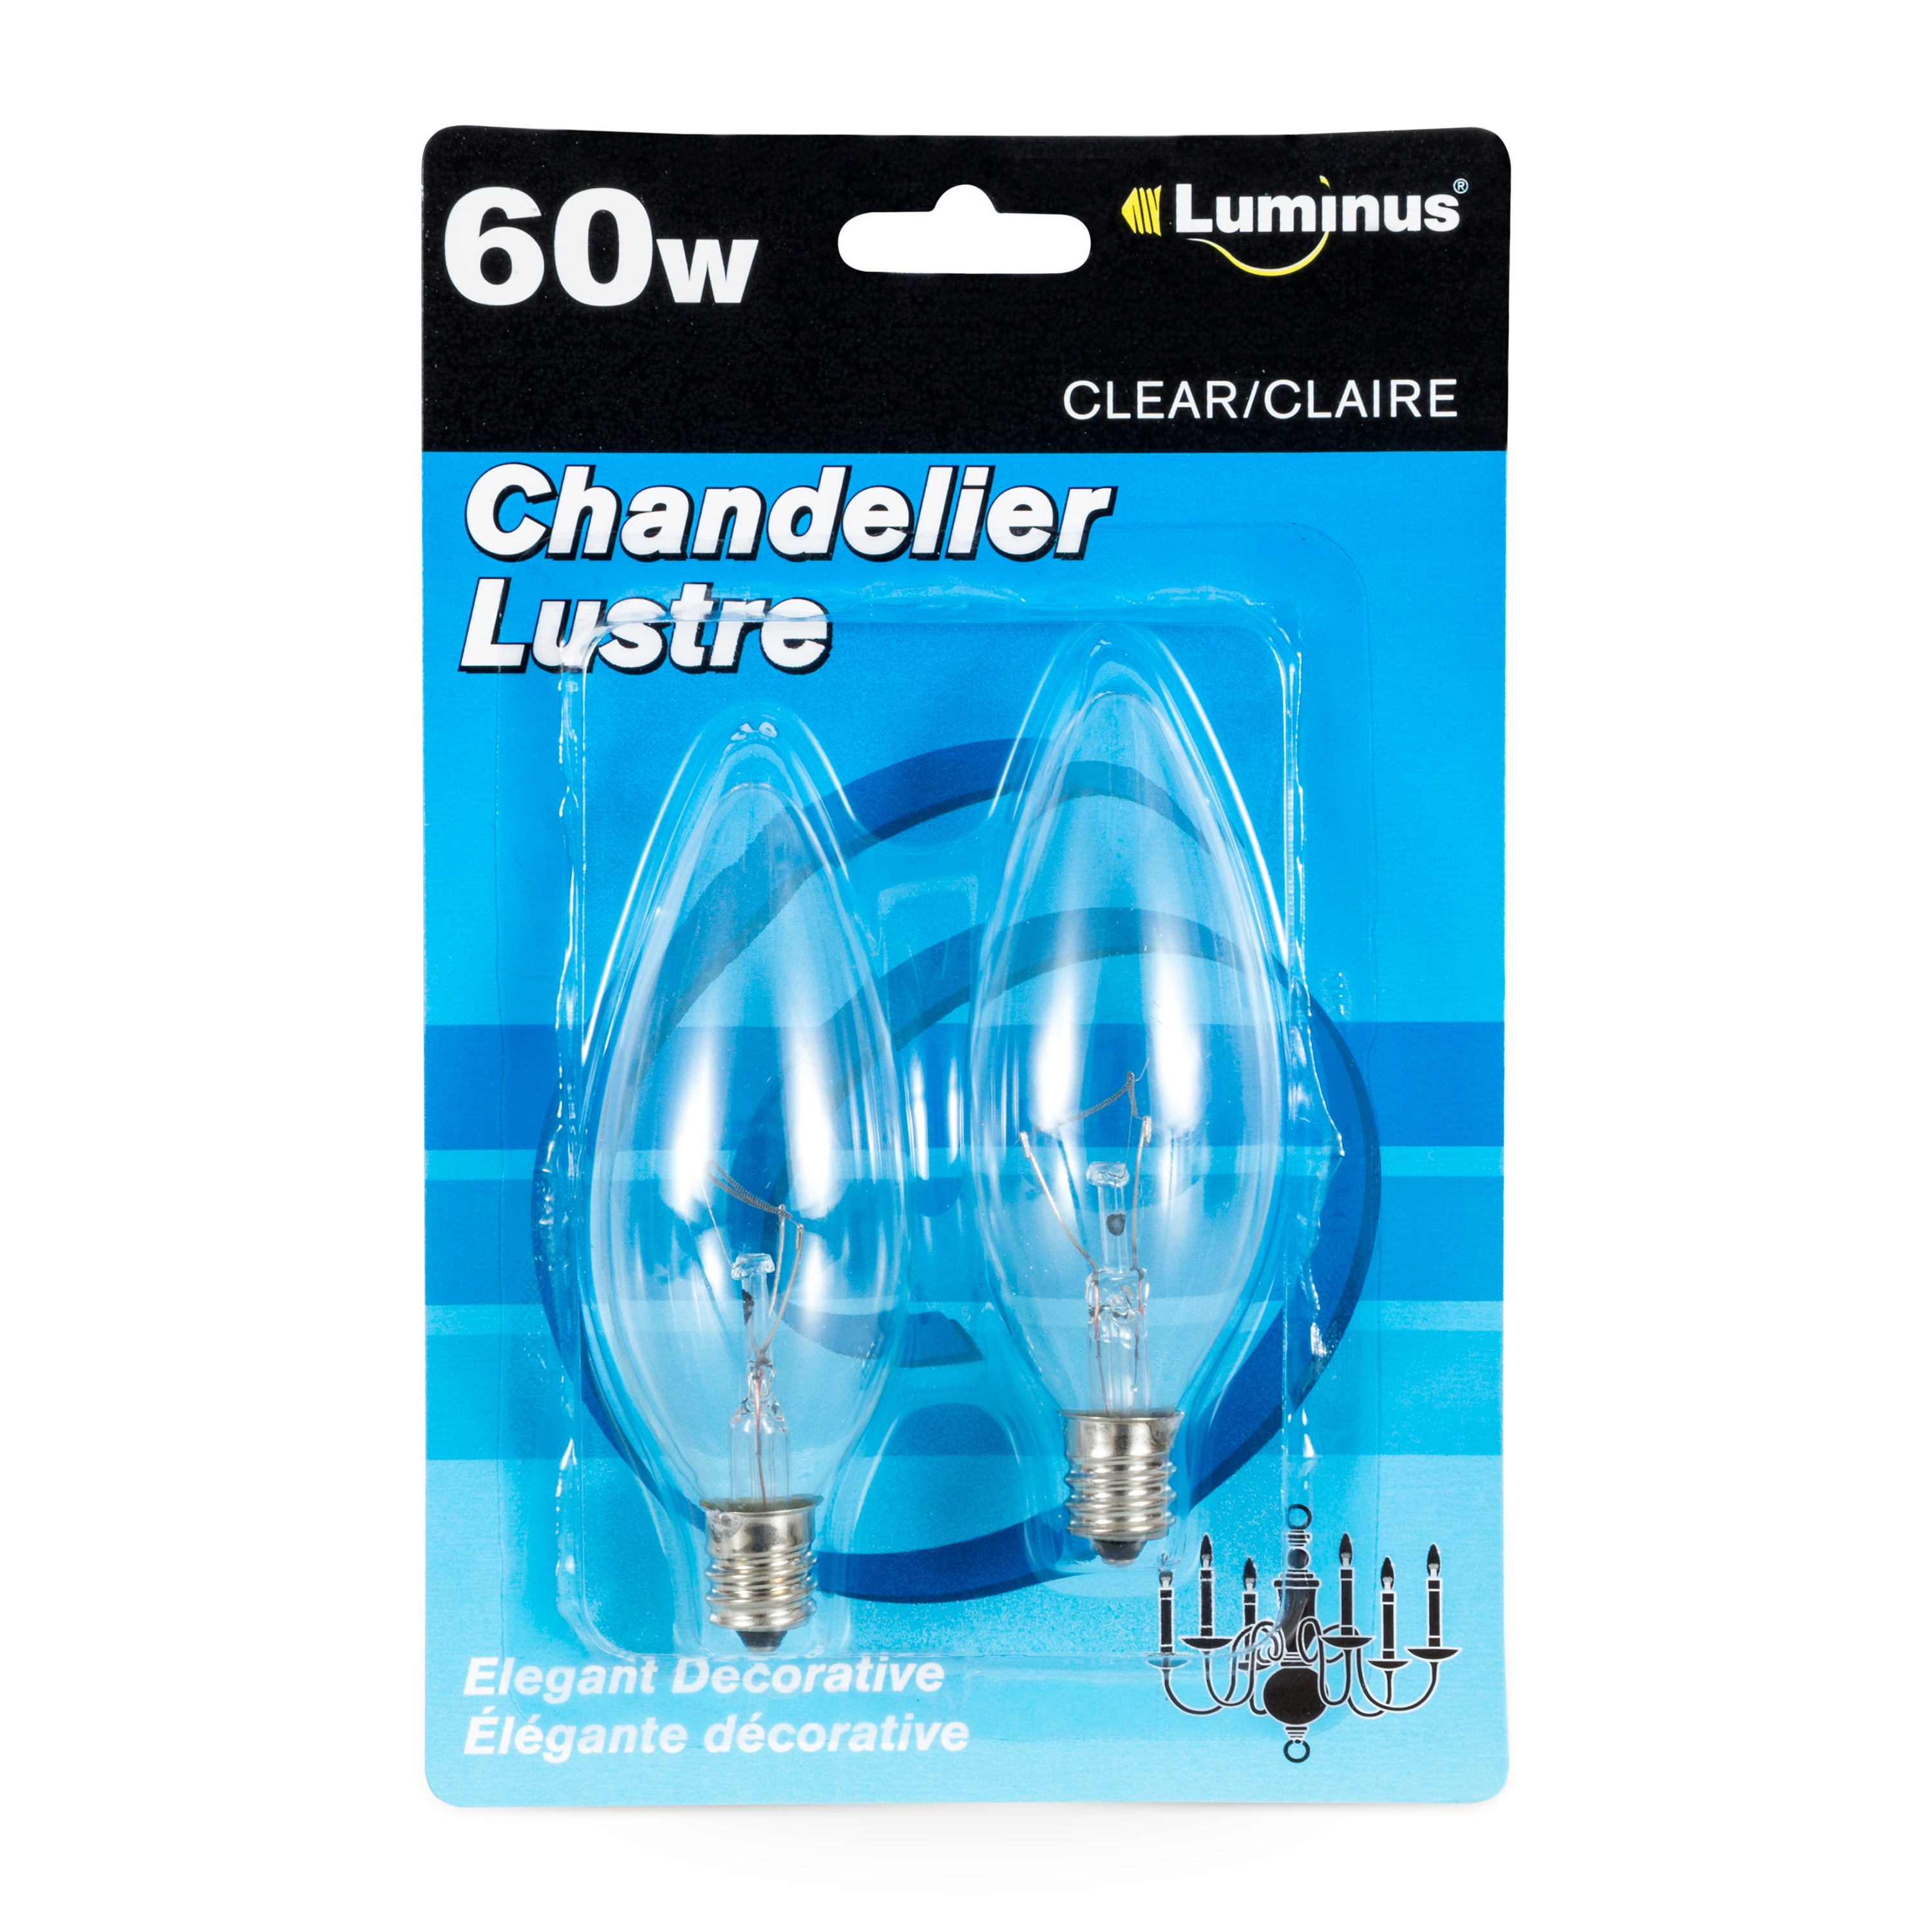 Luminus 60W/Ctc/120V/1500H/Clear Chandelier 2/Pack